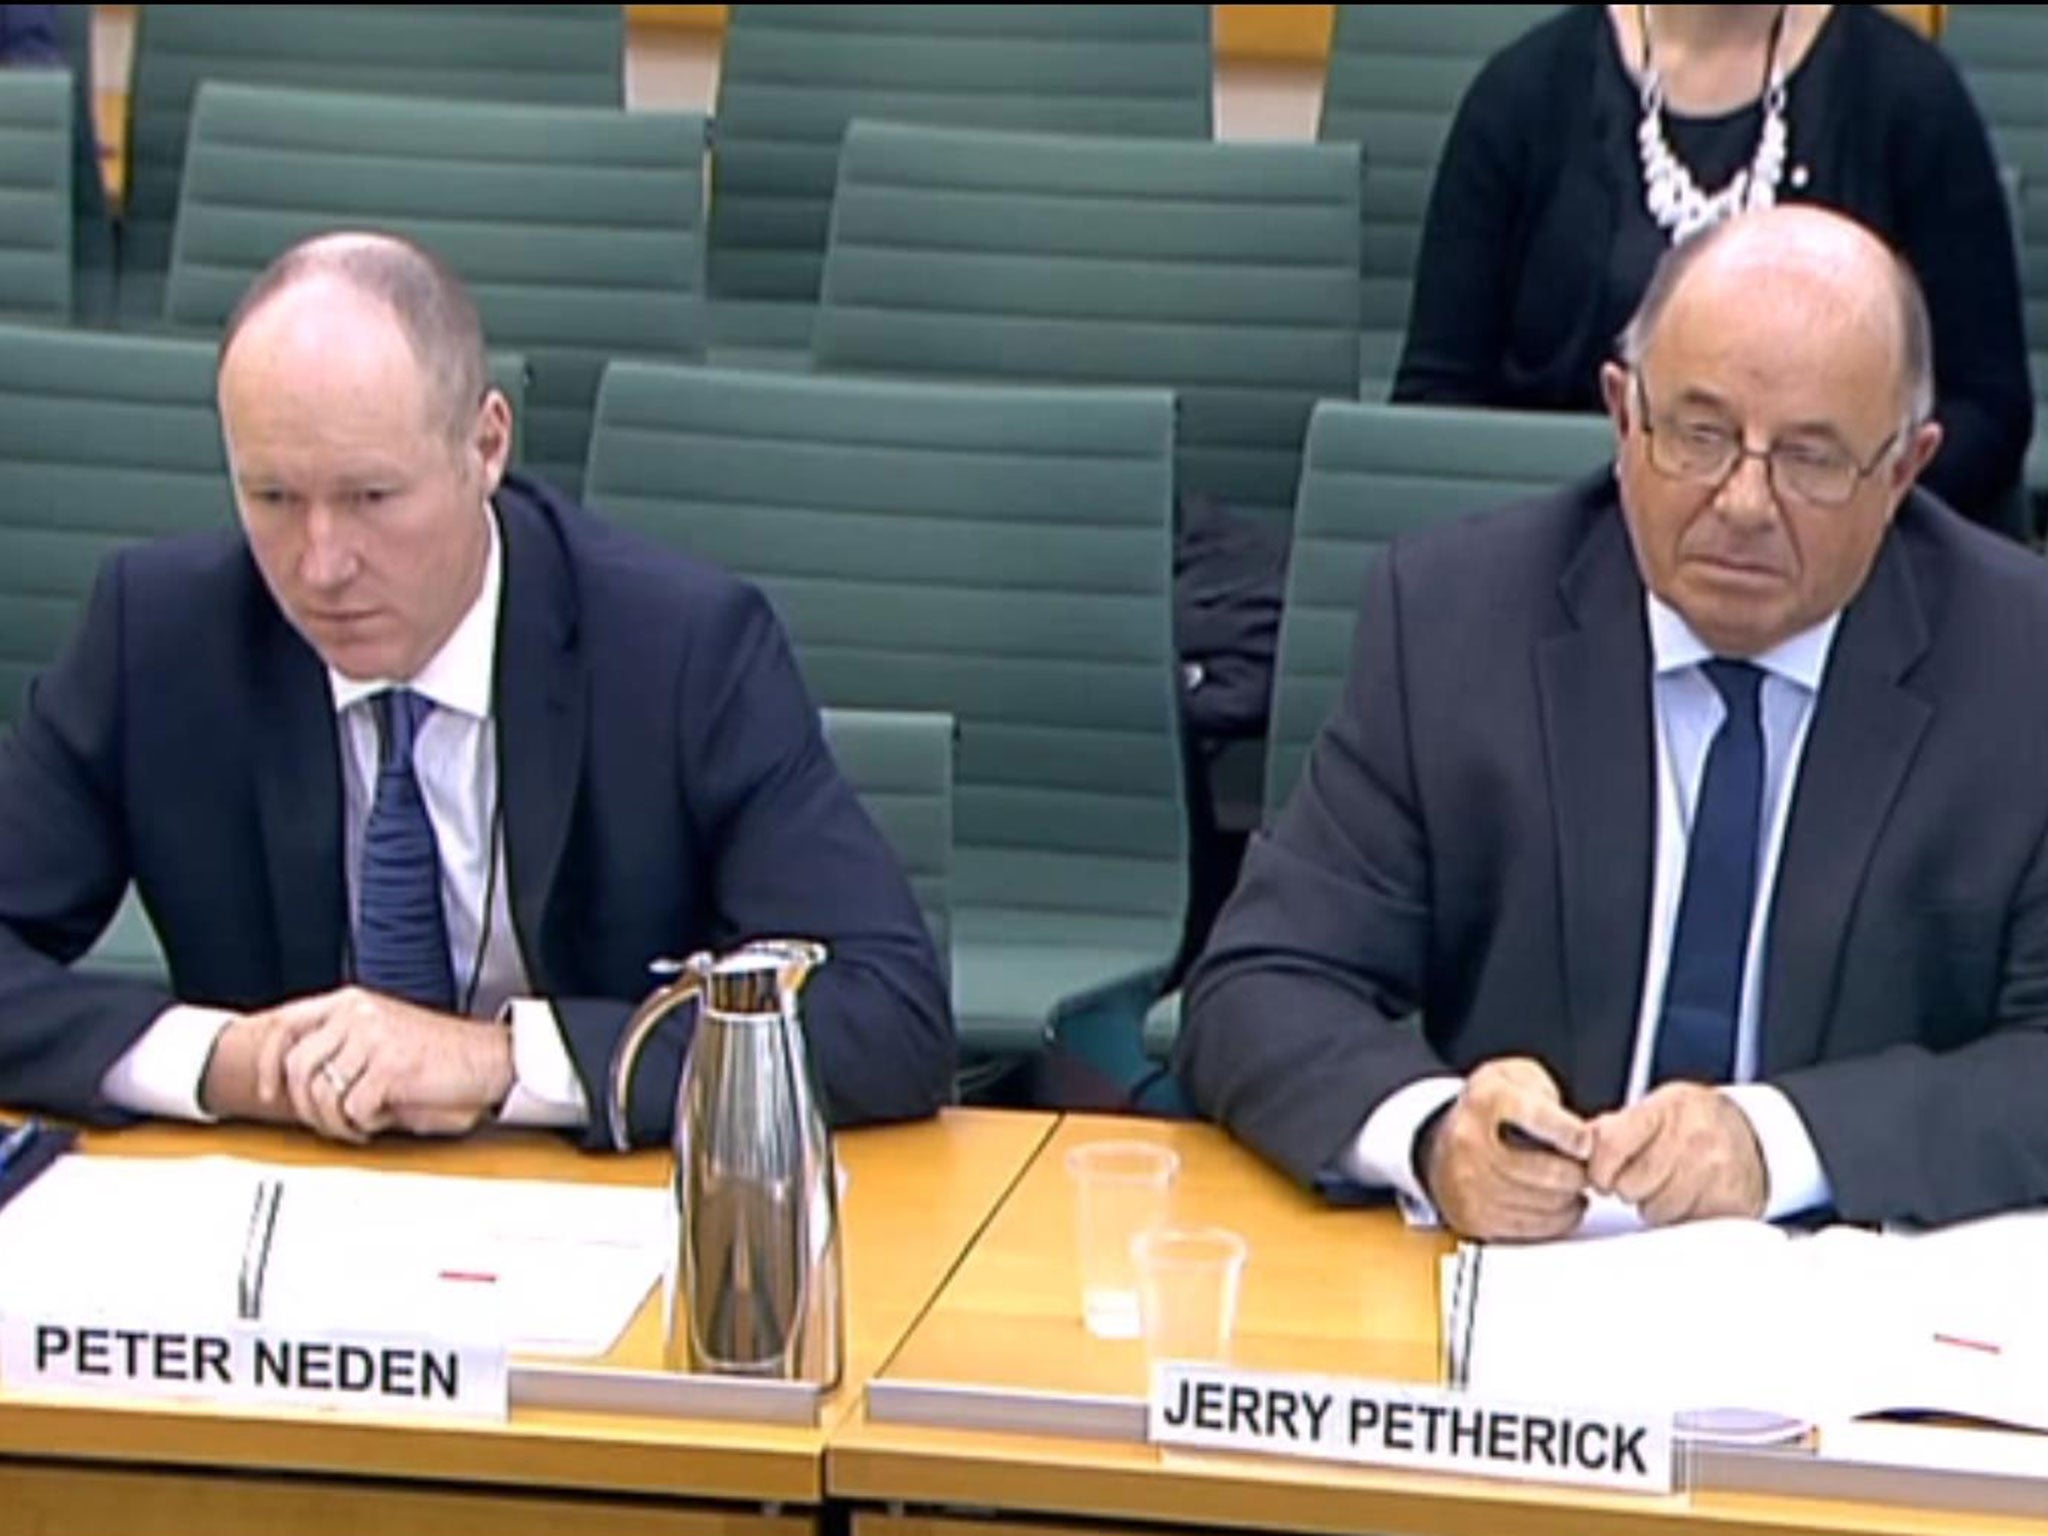 G4S managers Peter Neden and Jerry Petherick were questioned by the Home Affairs Committee on 14 September